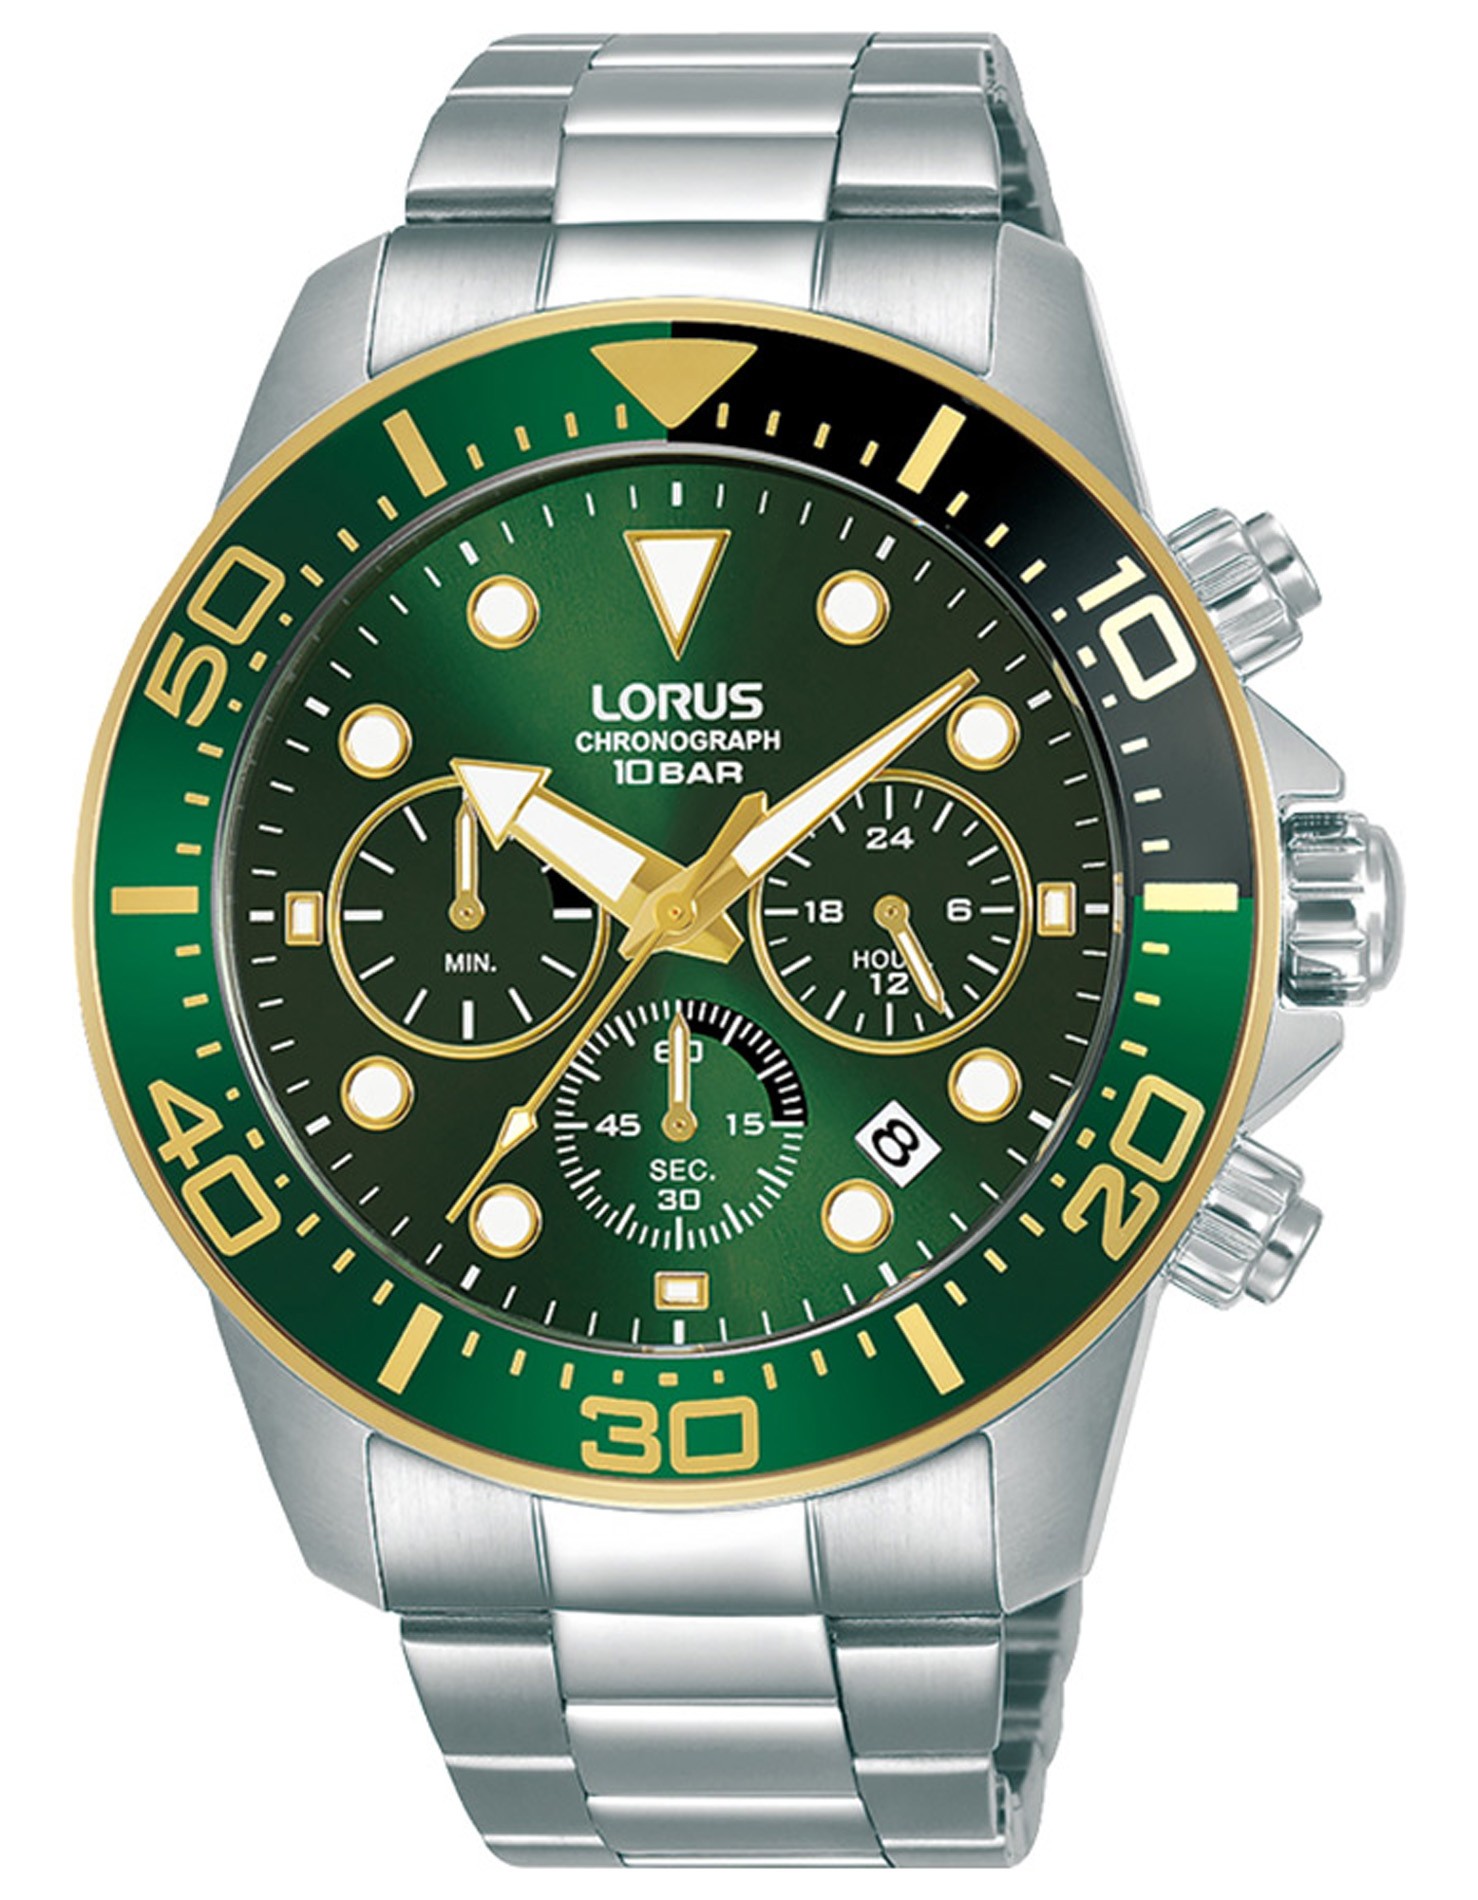 Lorus Men\'s Watch Lorus Sport Man Stainless Steel Men\'s Watch With Dark  Green Sunray Dial and Flat Mineral Crystal Glass 152295 RT340JX9 | Comprar Watch  Lorus Sport Man Stainless Steel Men\'s Watch